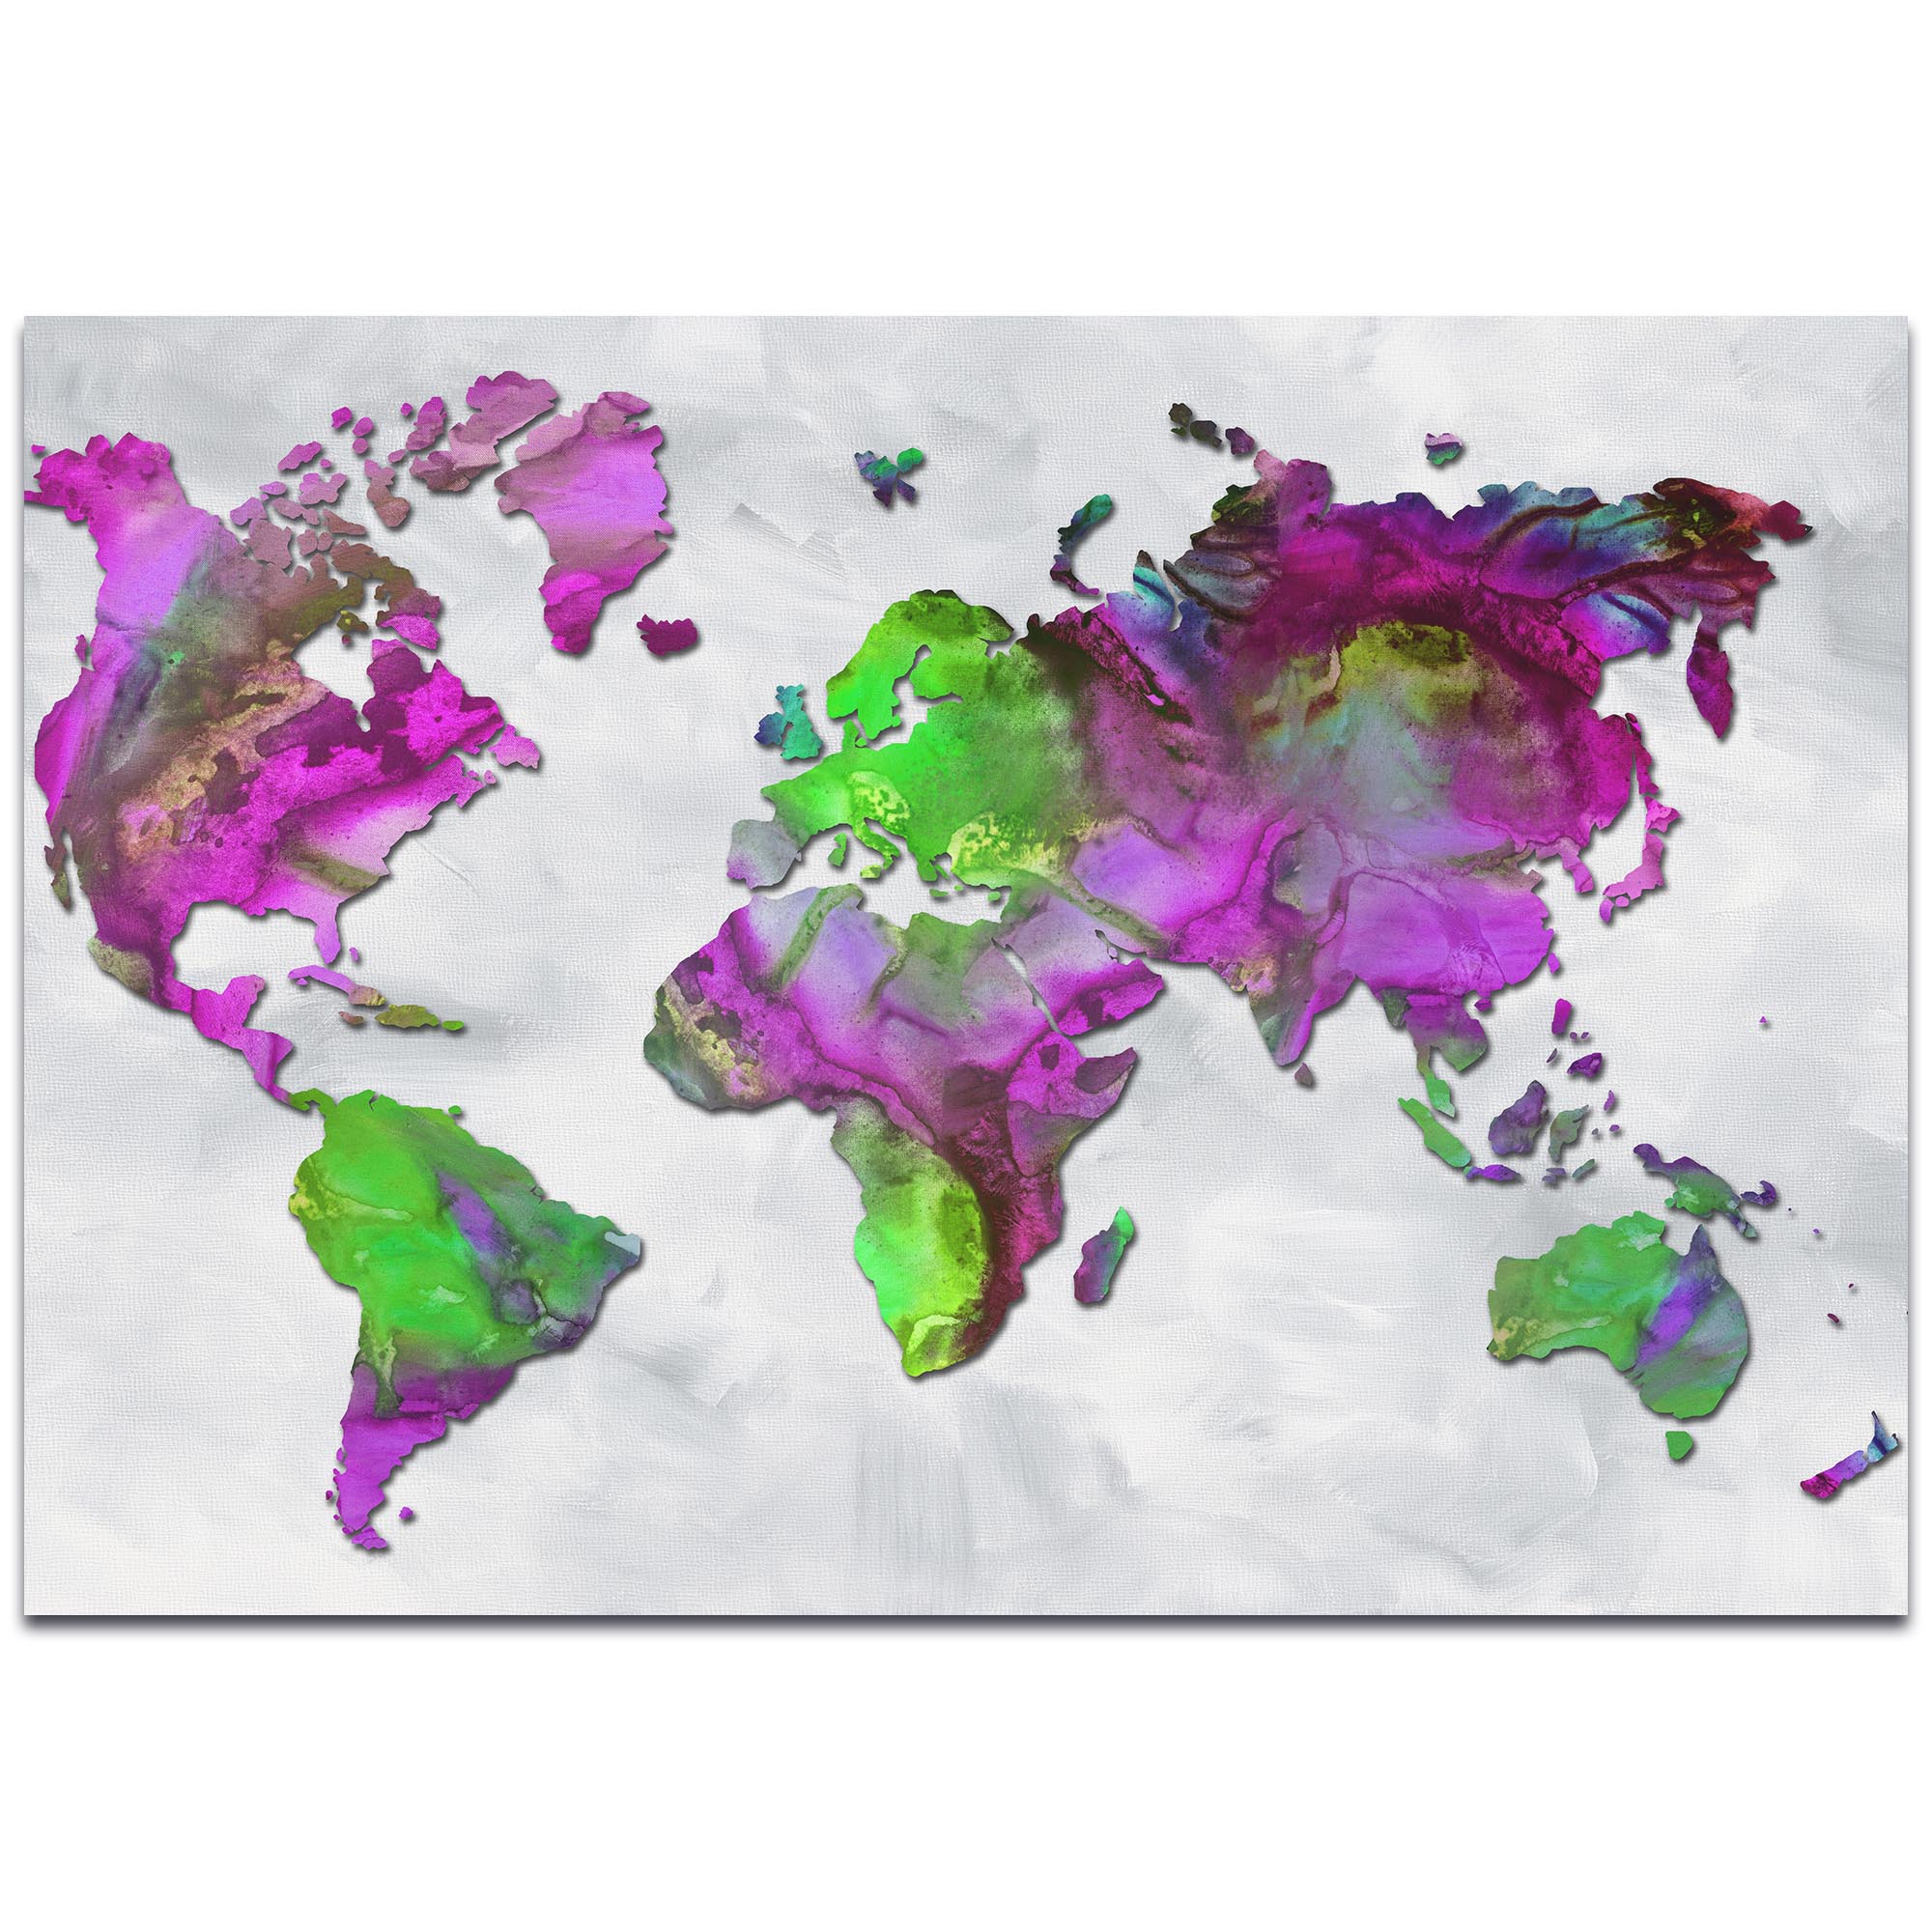 Abstract World Map 'The Beauty of Color Overlay v2' - Modern Map Art on Metal or Acrylic